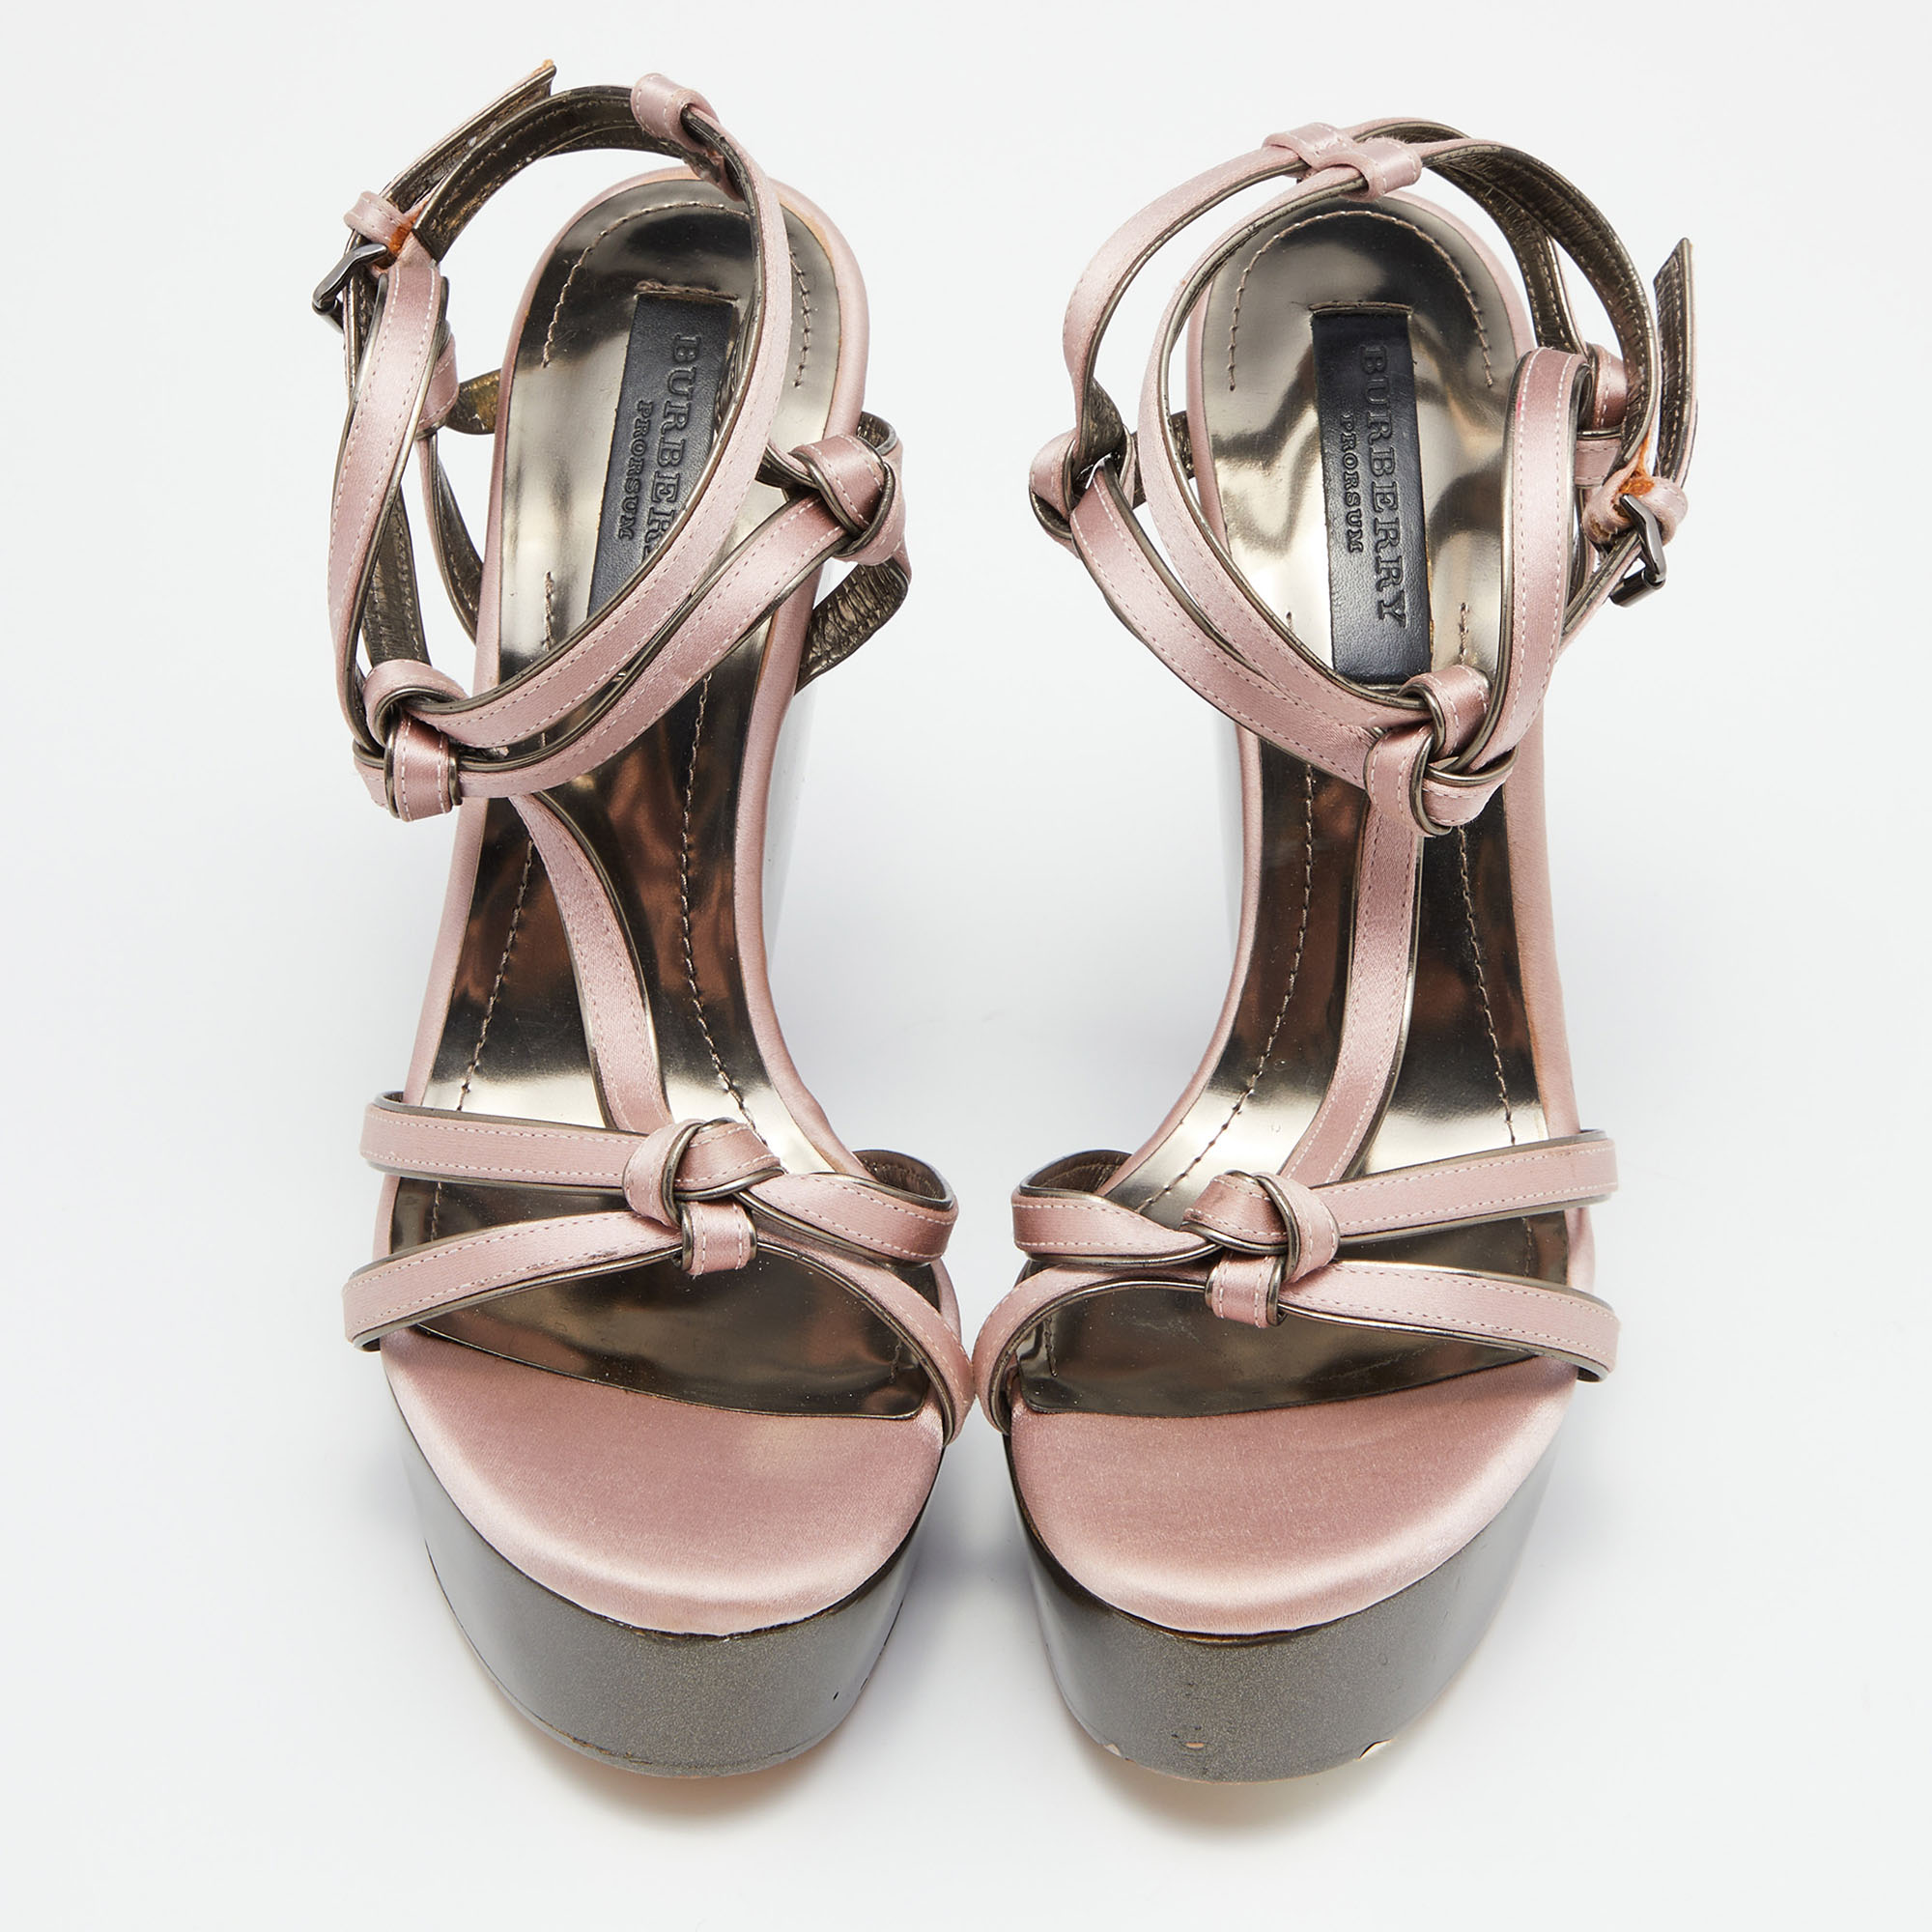 Burberry Pink Satin Ankle Wrap Wedge Sandals Size 40